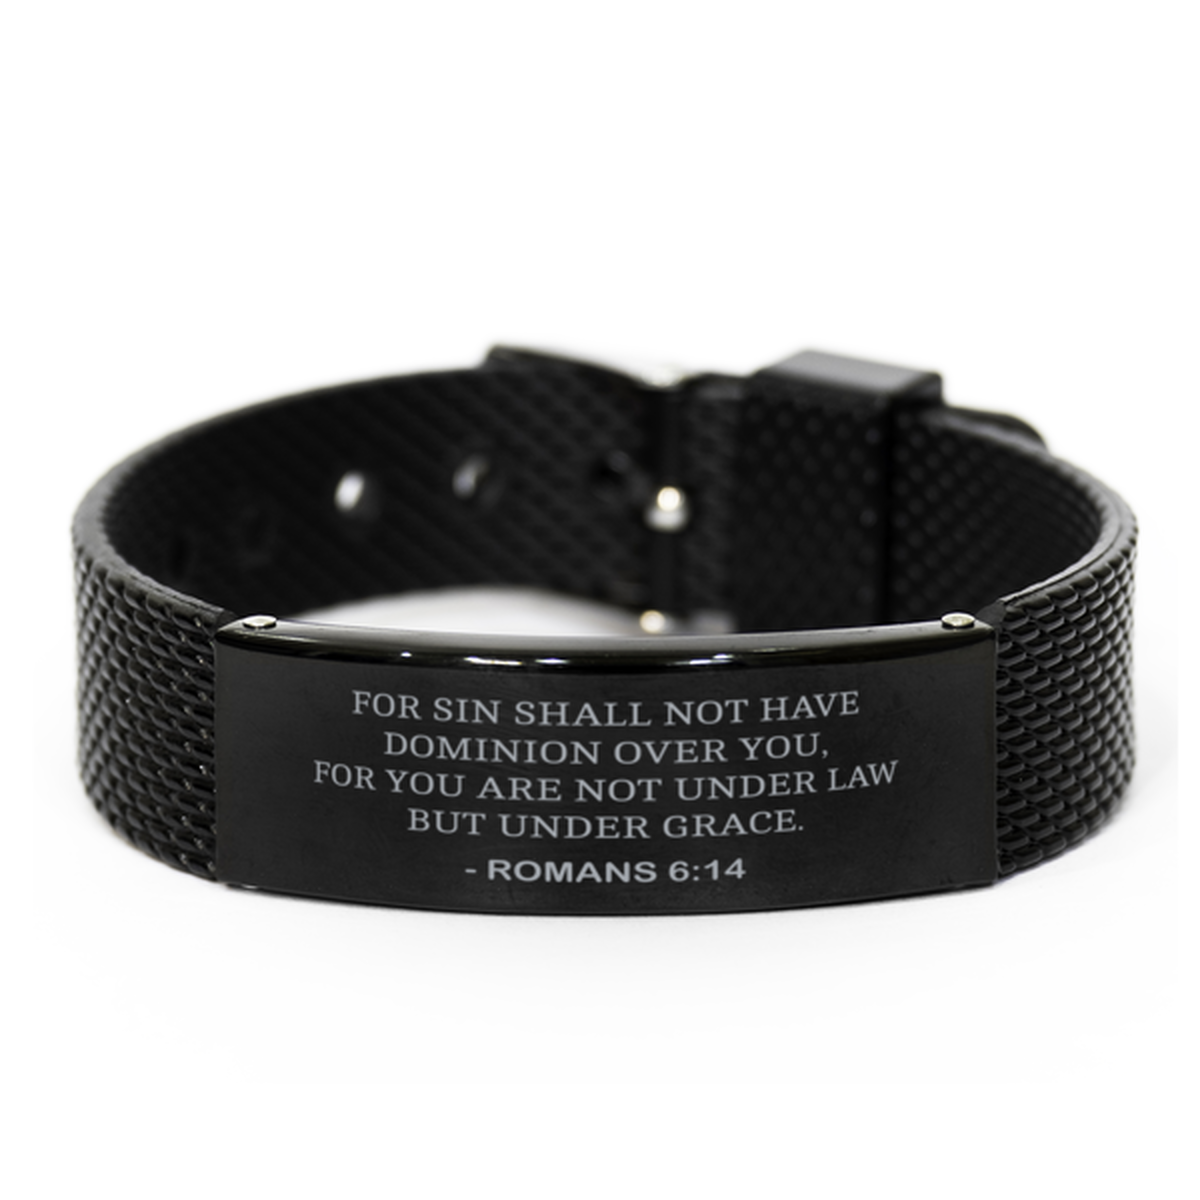 Christian Black Bracelet,, Romans 6:14 For Sin Shall Not Have Dominion Over You, For You, Motivational Bible Verse Gifts For Men Women